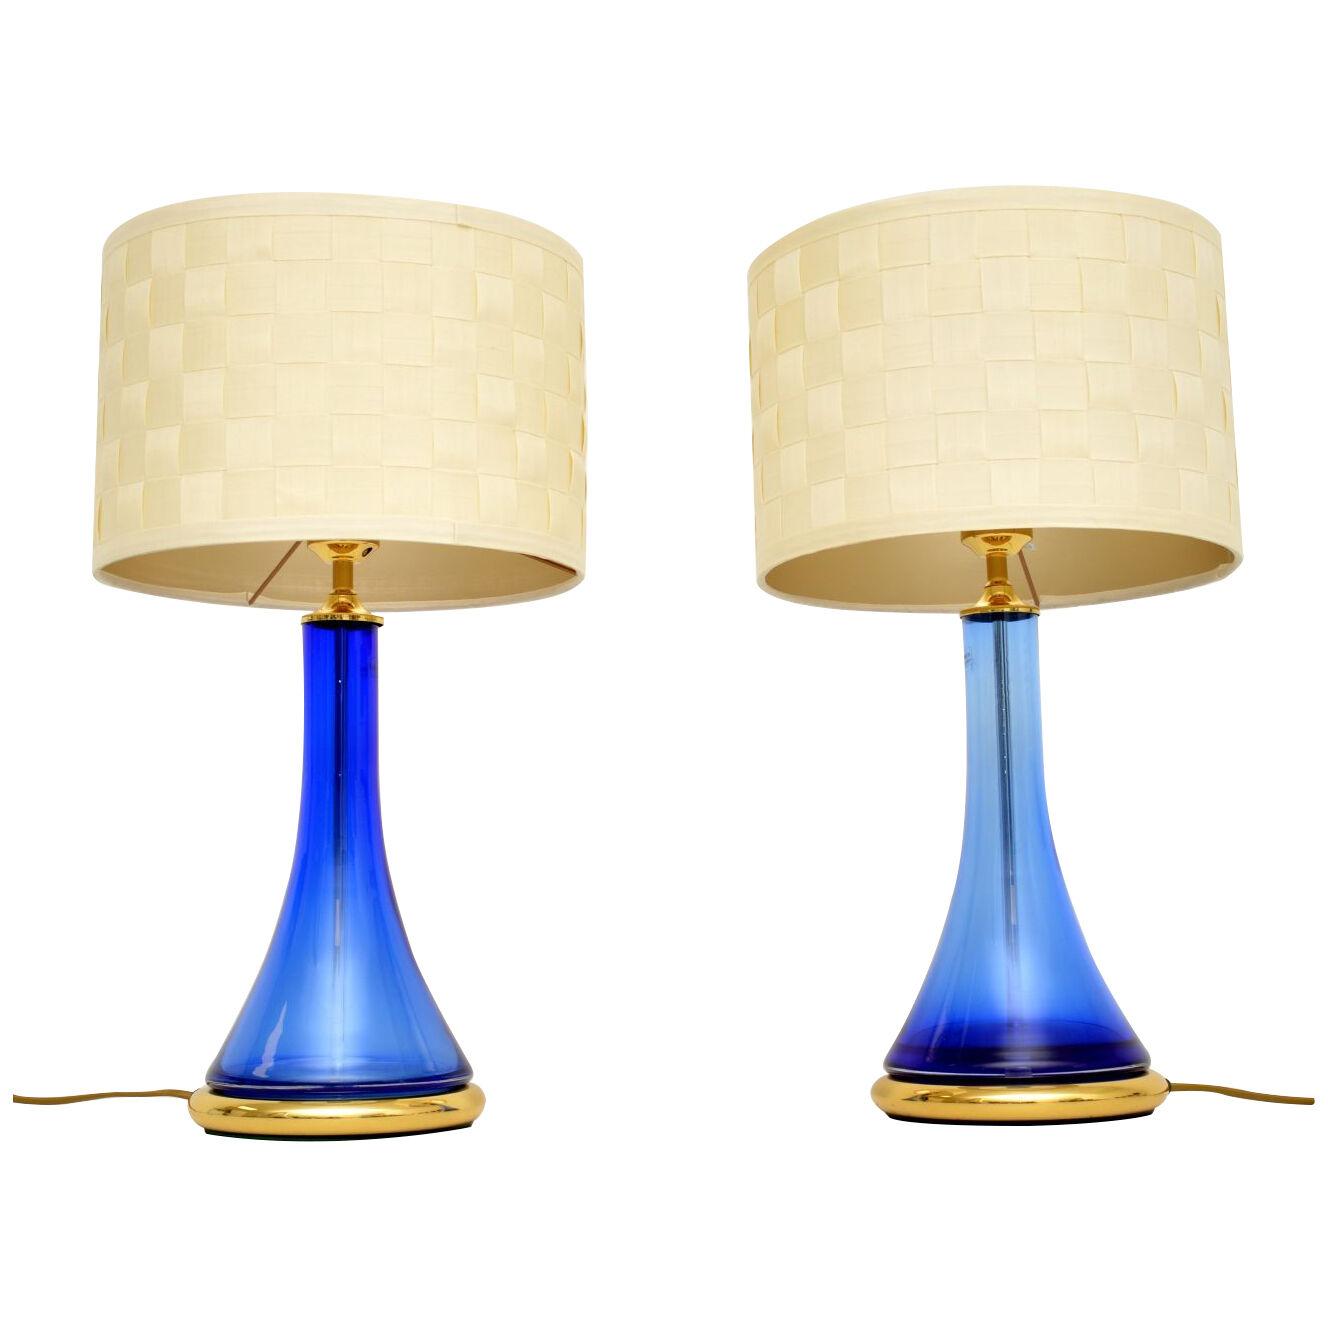 Pair of Vintage German Glass Table Lamps by Nachtmann